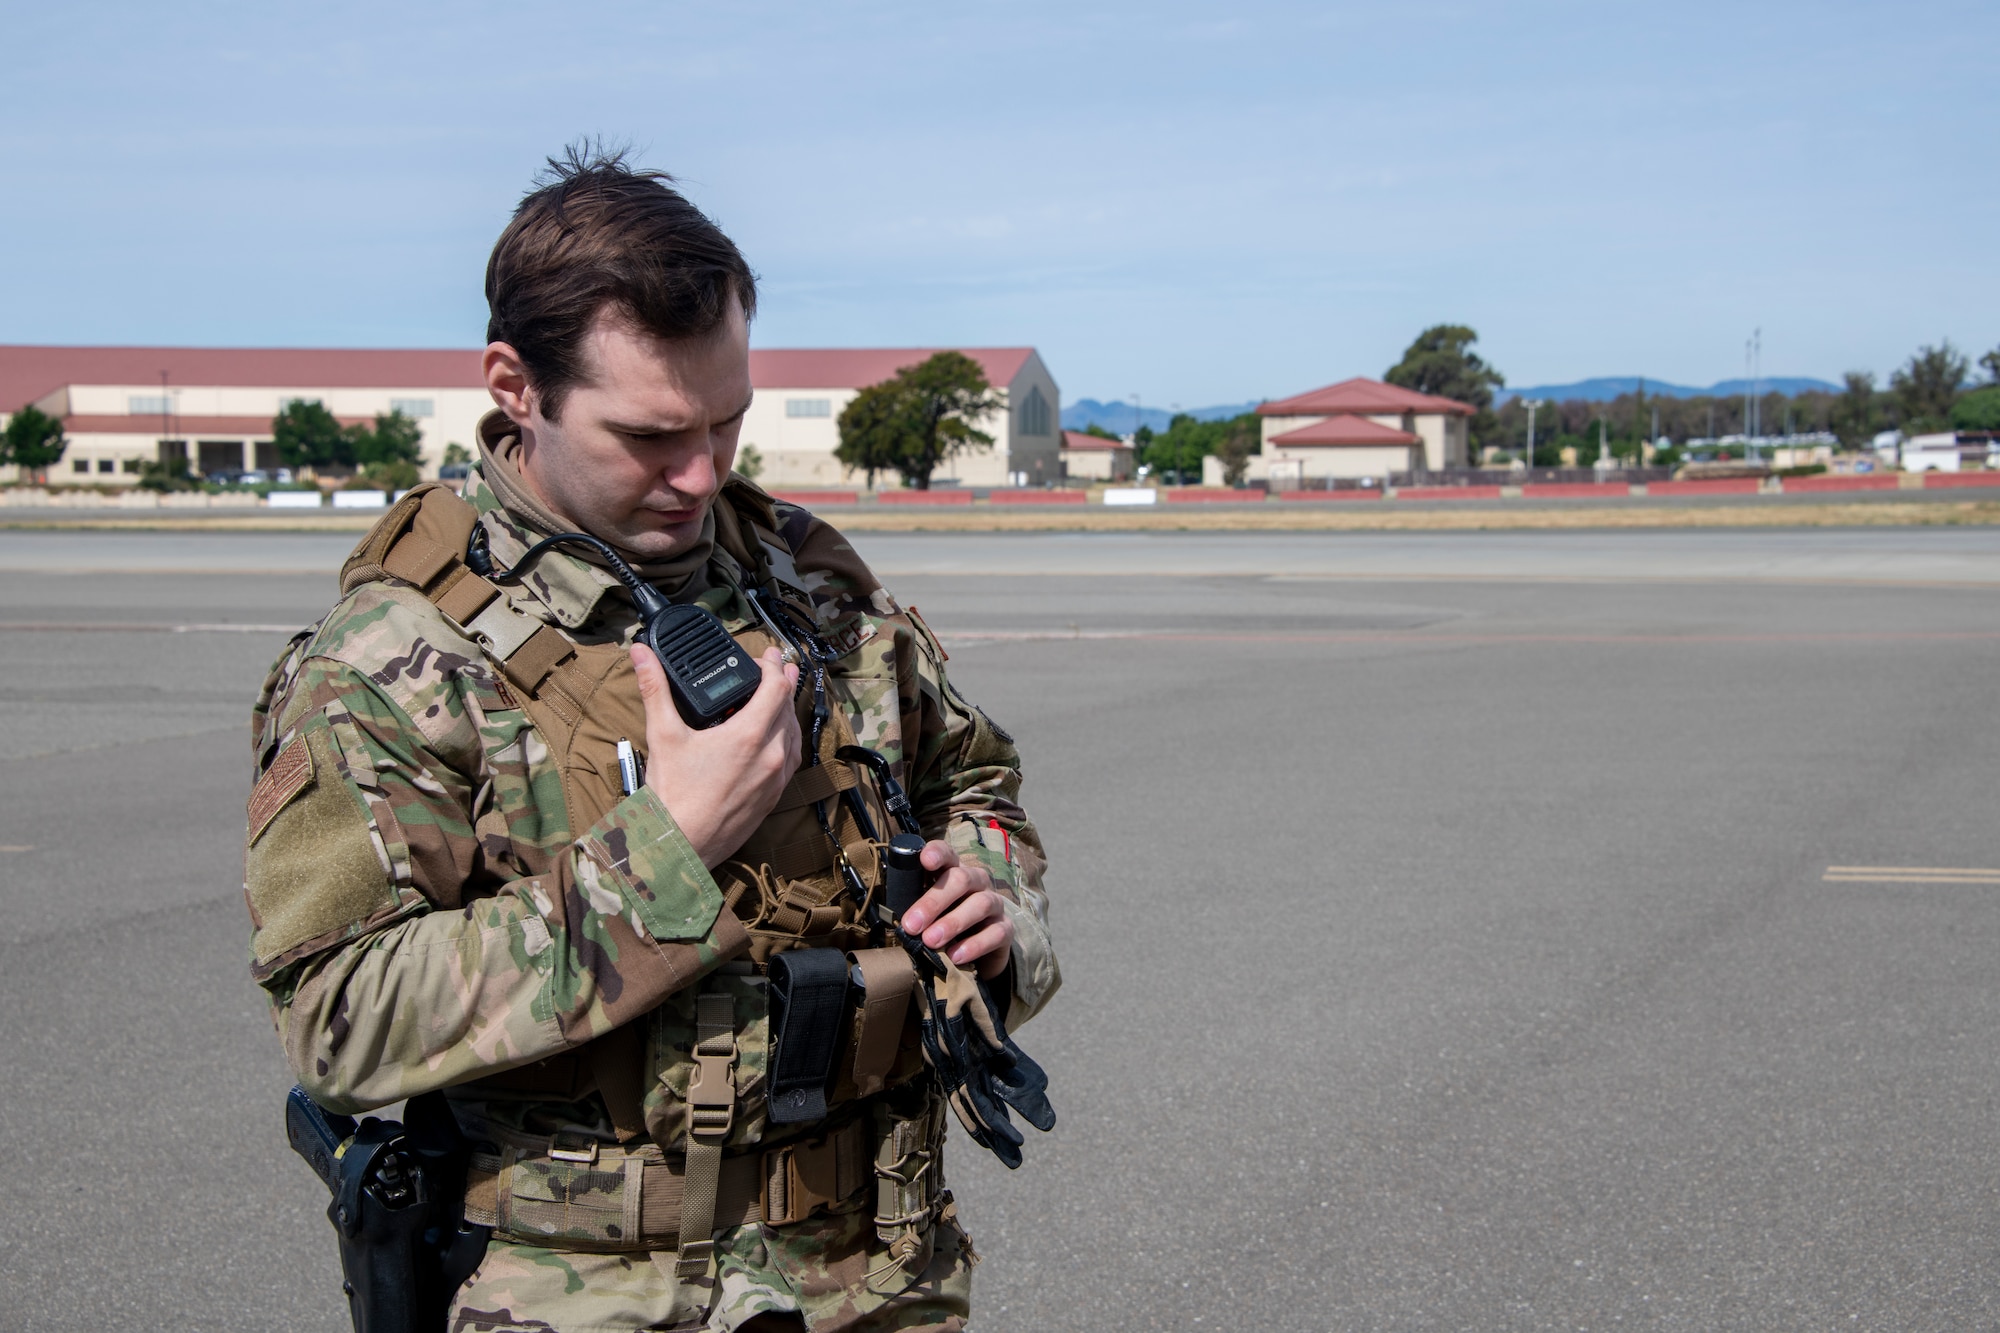 U.S. Air Force Staff Sgt. Brenden Rinehart, 60th Security Forces Squadron patrolman, calls in a perimeter check using his mobile radio May 16, 2020, on the flight line at Travis Air Force Base, California. As a security forces Airman at Travis AFB, Rinehart supports missions for the 60th Air Mobility Wing, 621st Contingency Response Wing and the Air Force Reserve’s 349th Air Mobility Wing. (U.S. Air Force photo by Tech. Sgt. James Hodgman)